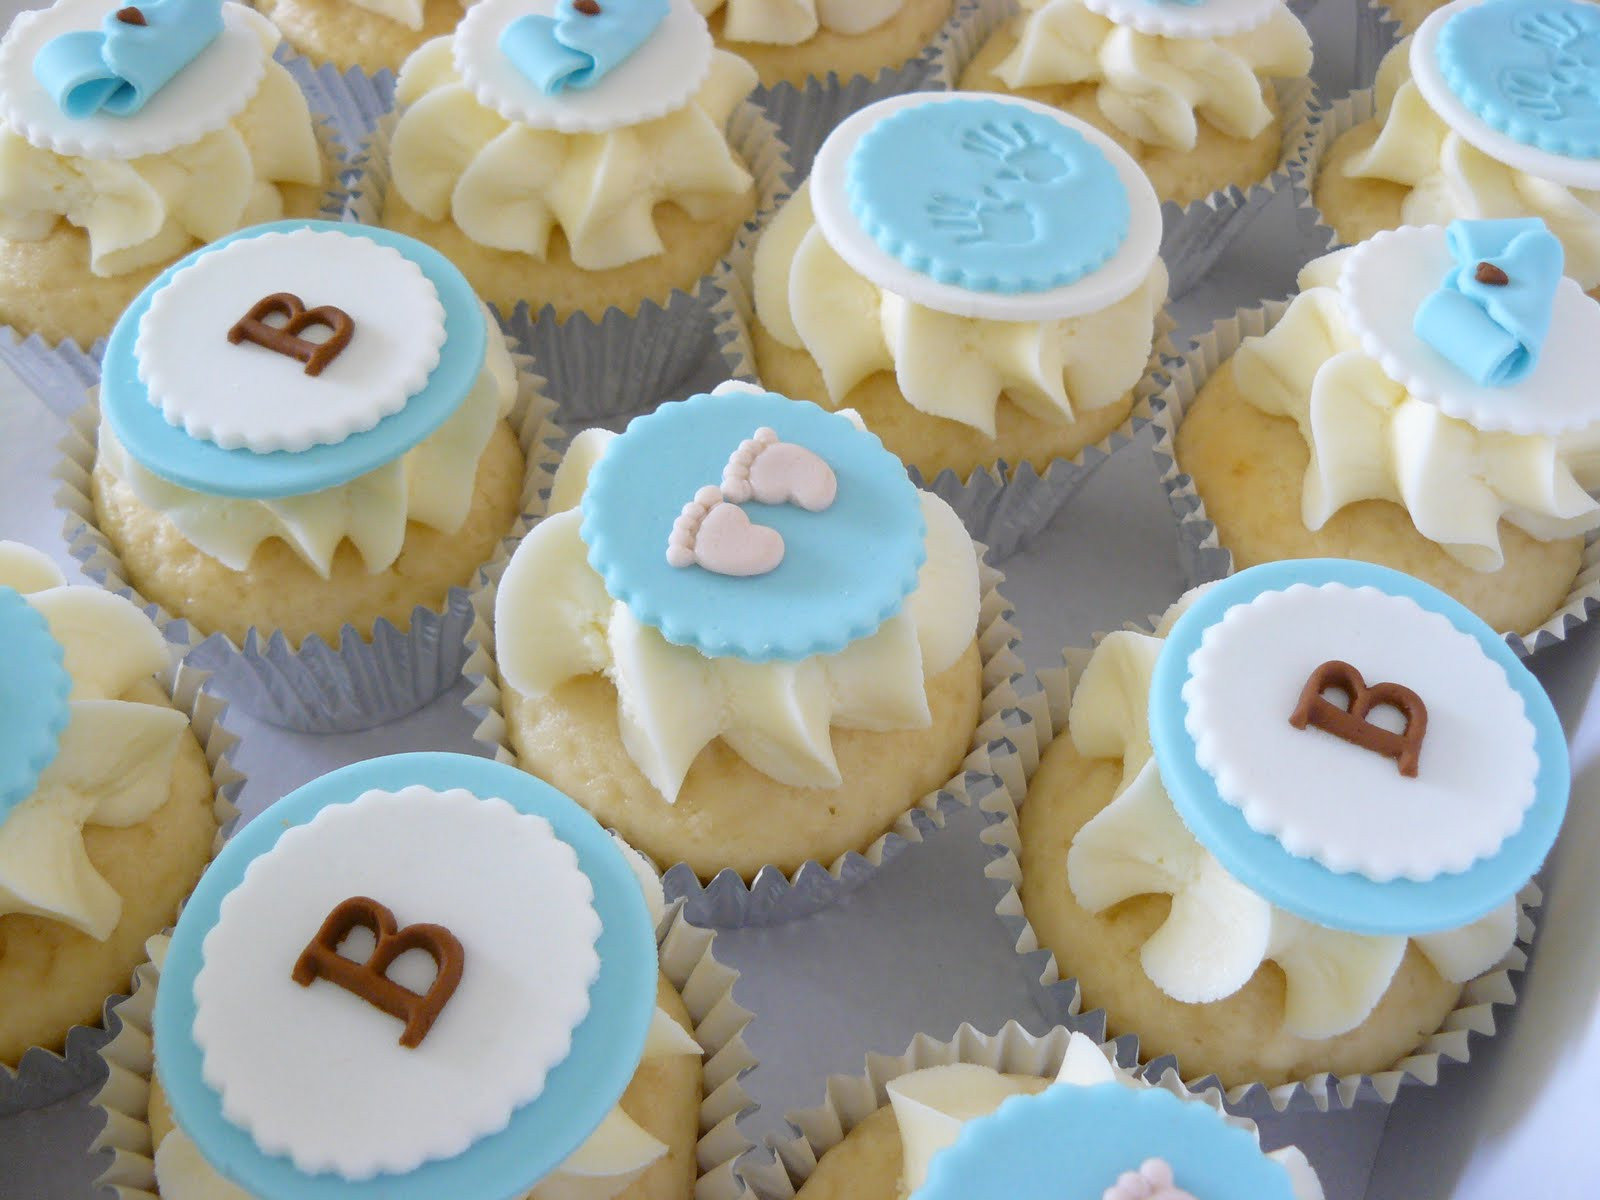 Baby Boy Cupcake Decorating Ideas
 70 Baby Shower Cakes and Cupcakes Ideas